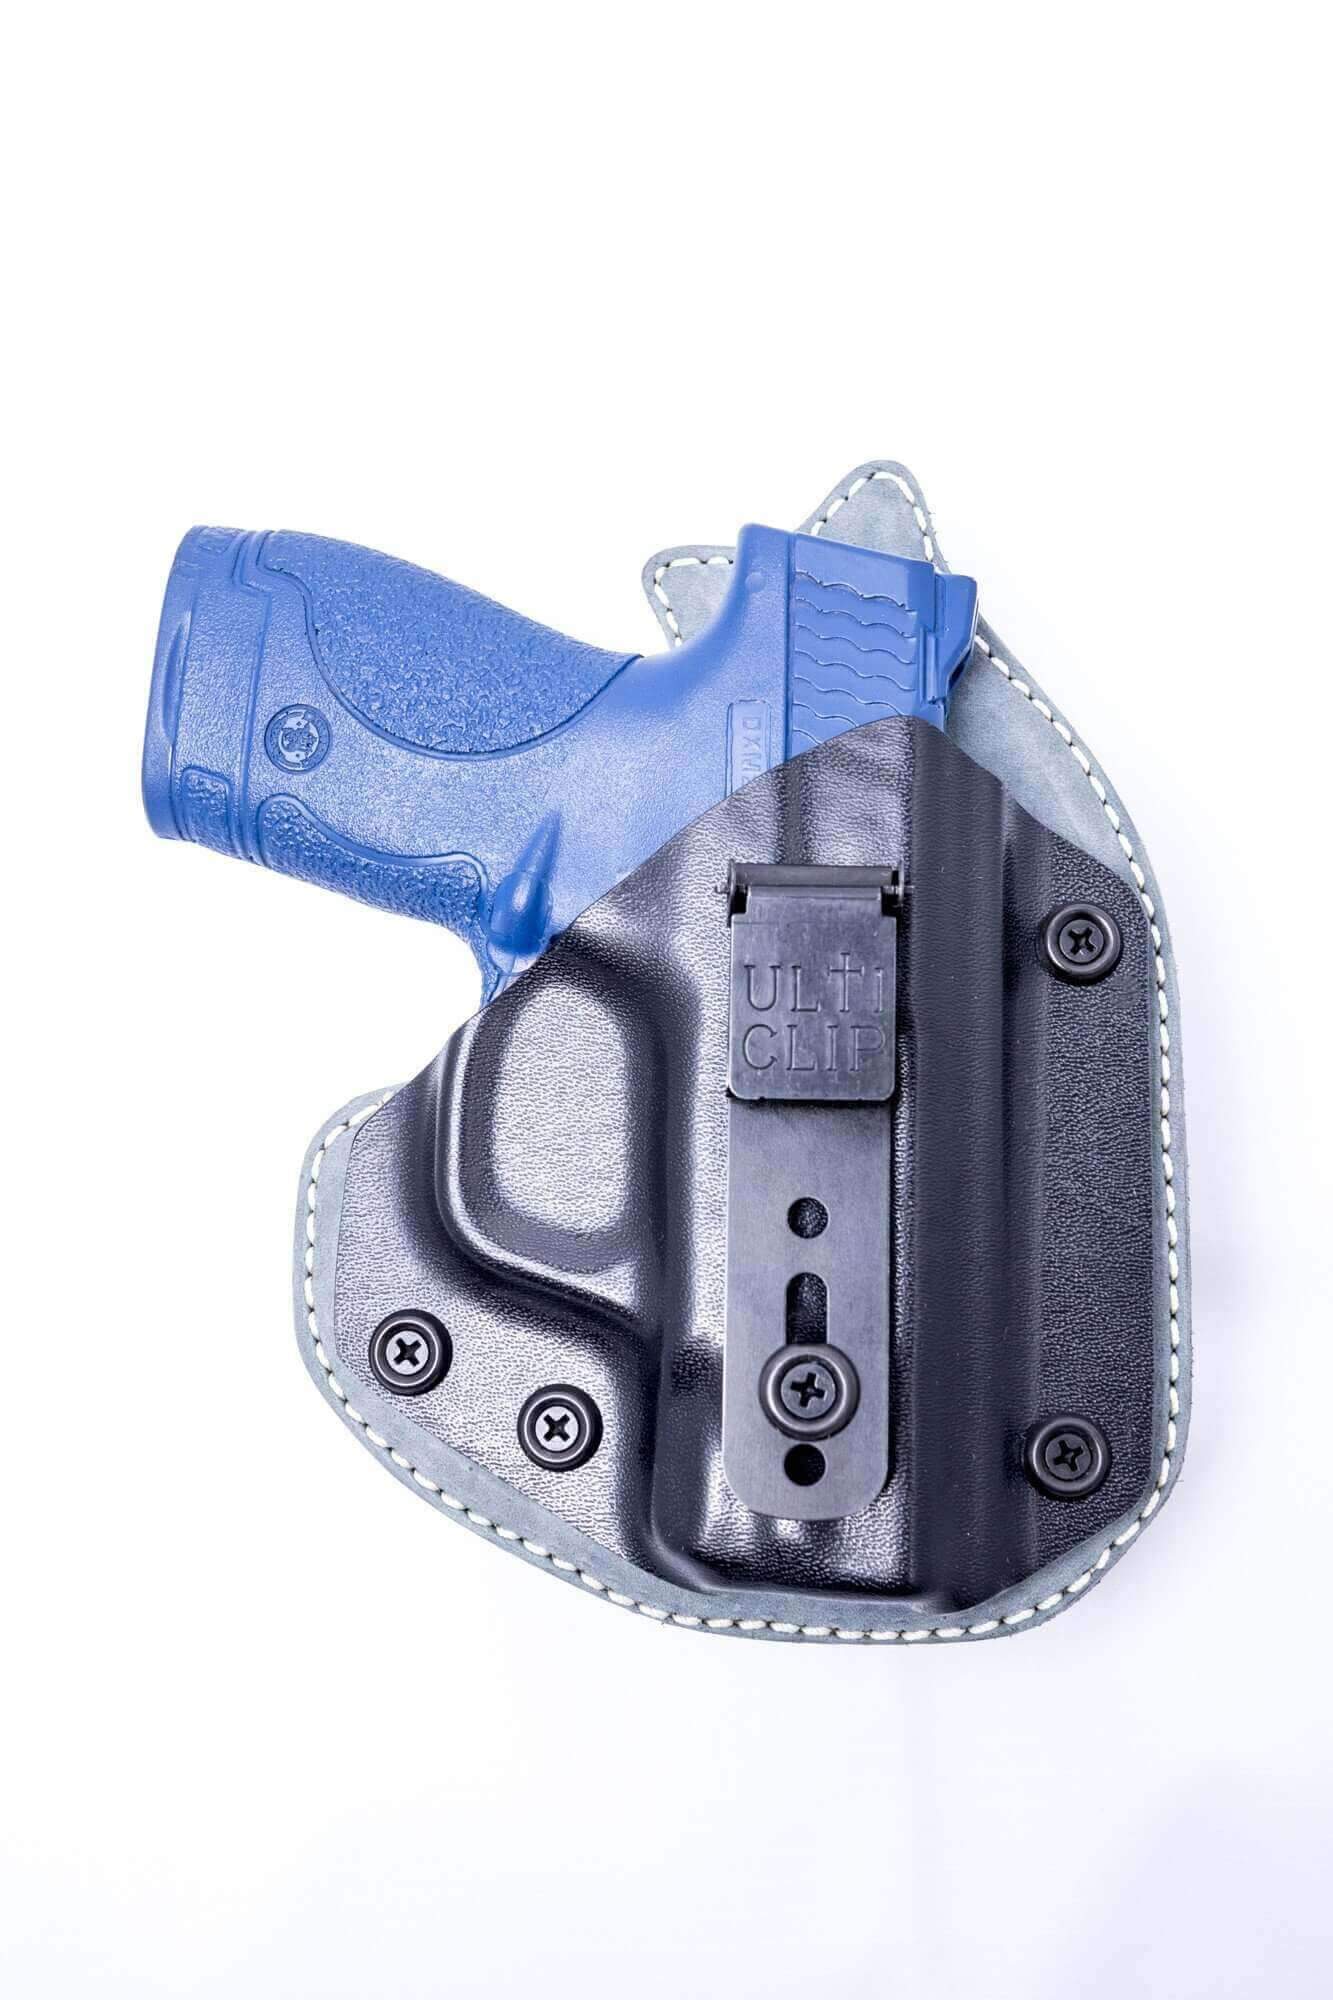 UltiClip Inside-the-Waistband Quick-Ship Holster